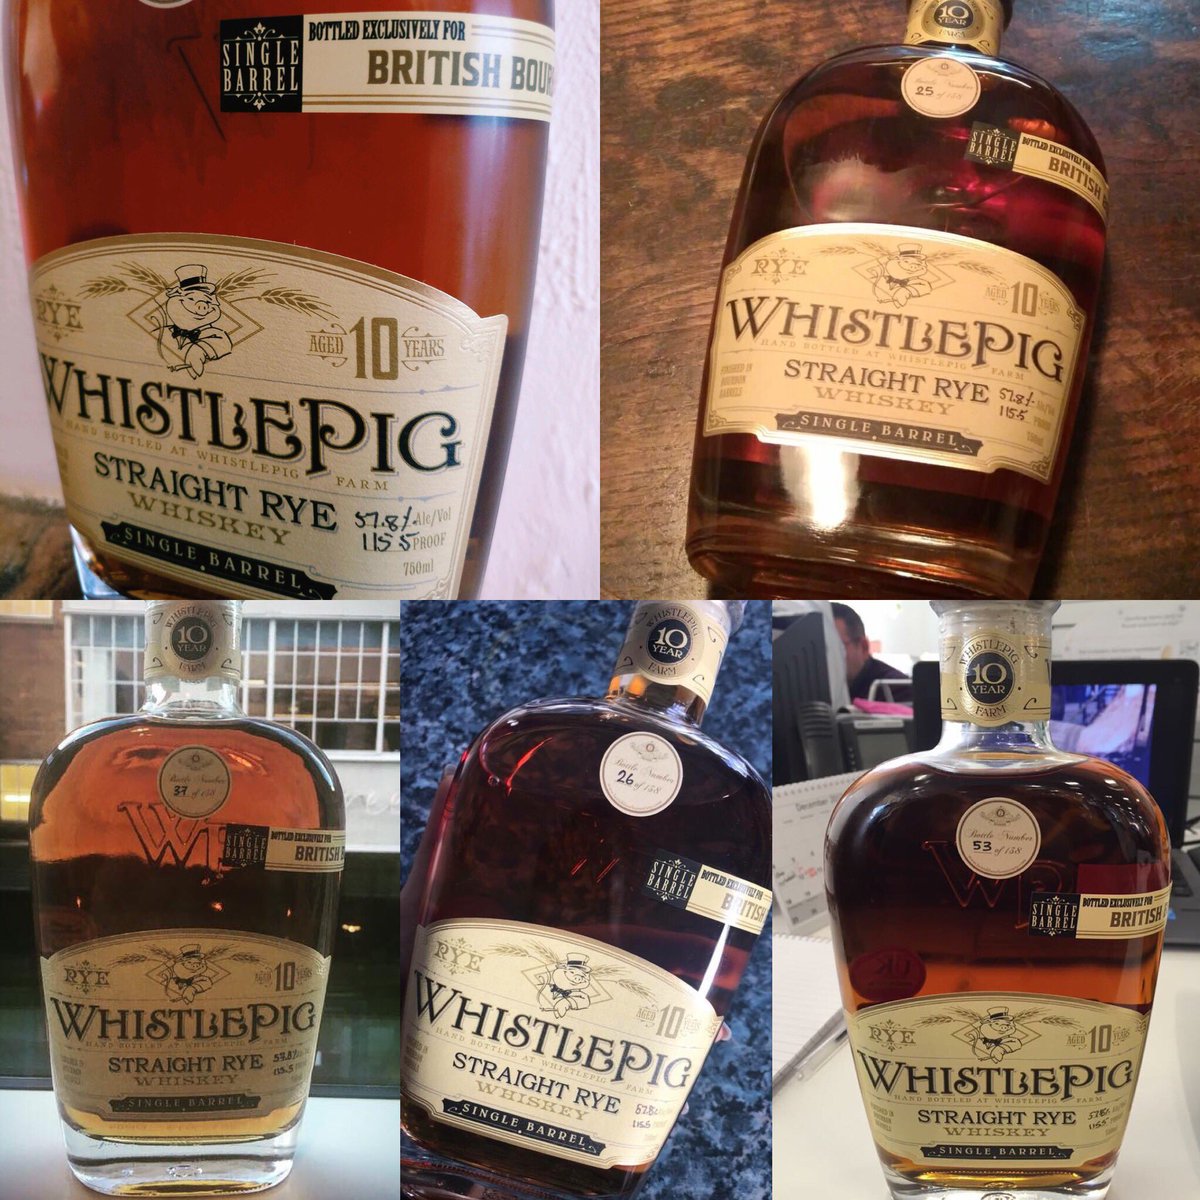 @BritishBourbon’s Second Private Barrel has started to arrive with BBS members - excited to hear how you all find it! @WhistlePigRye @Axiom_Brands